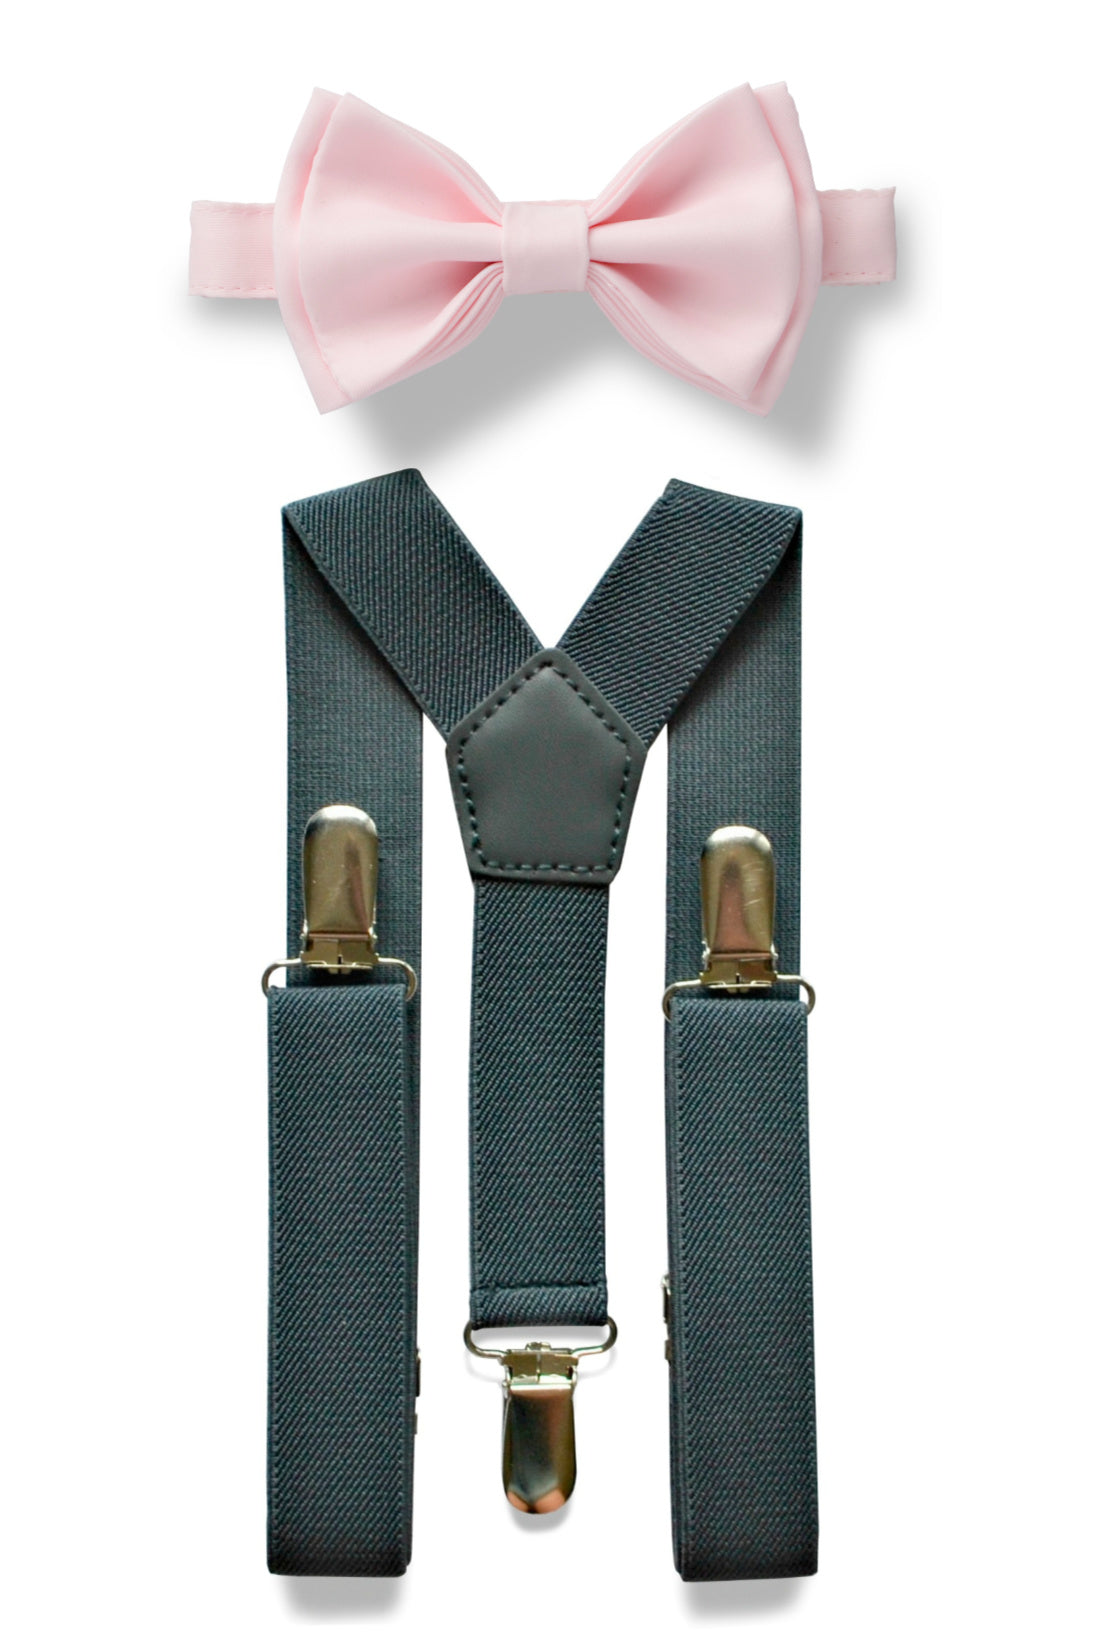 Charcoal Grey Suspenders & Blushing Pink Bow Tie